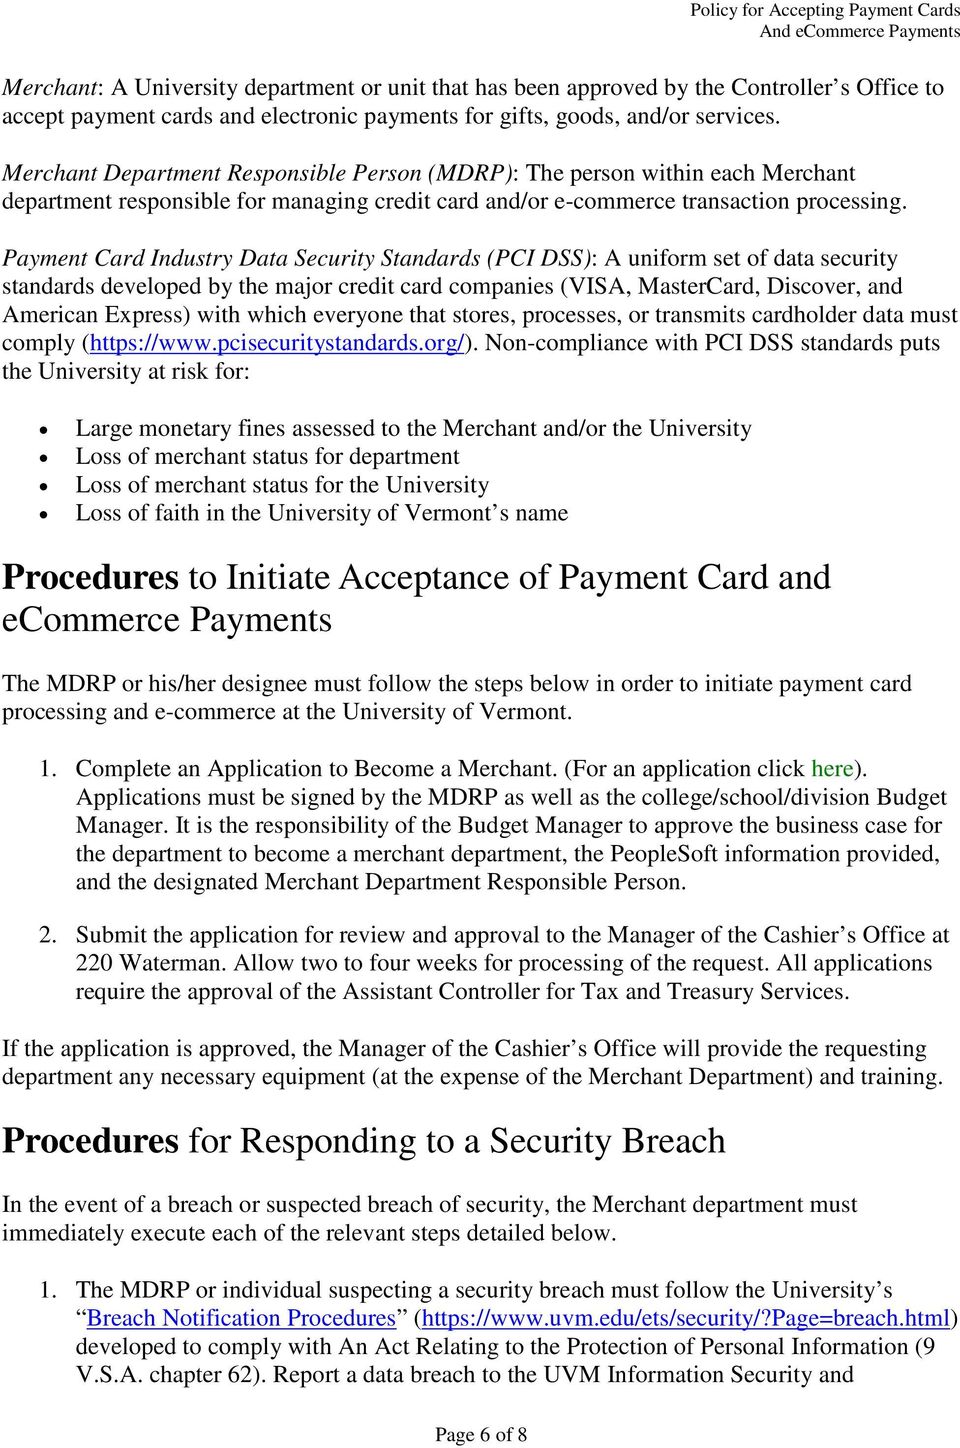 Payment Card Industry Data Security Standards (PCI DSS): A uniform set of data security standards developed by the major credit card companies (VISA, MasterCard, Discover, and American Express) with